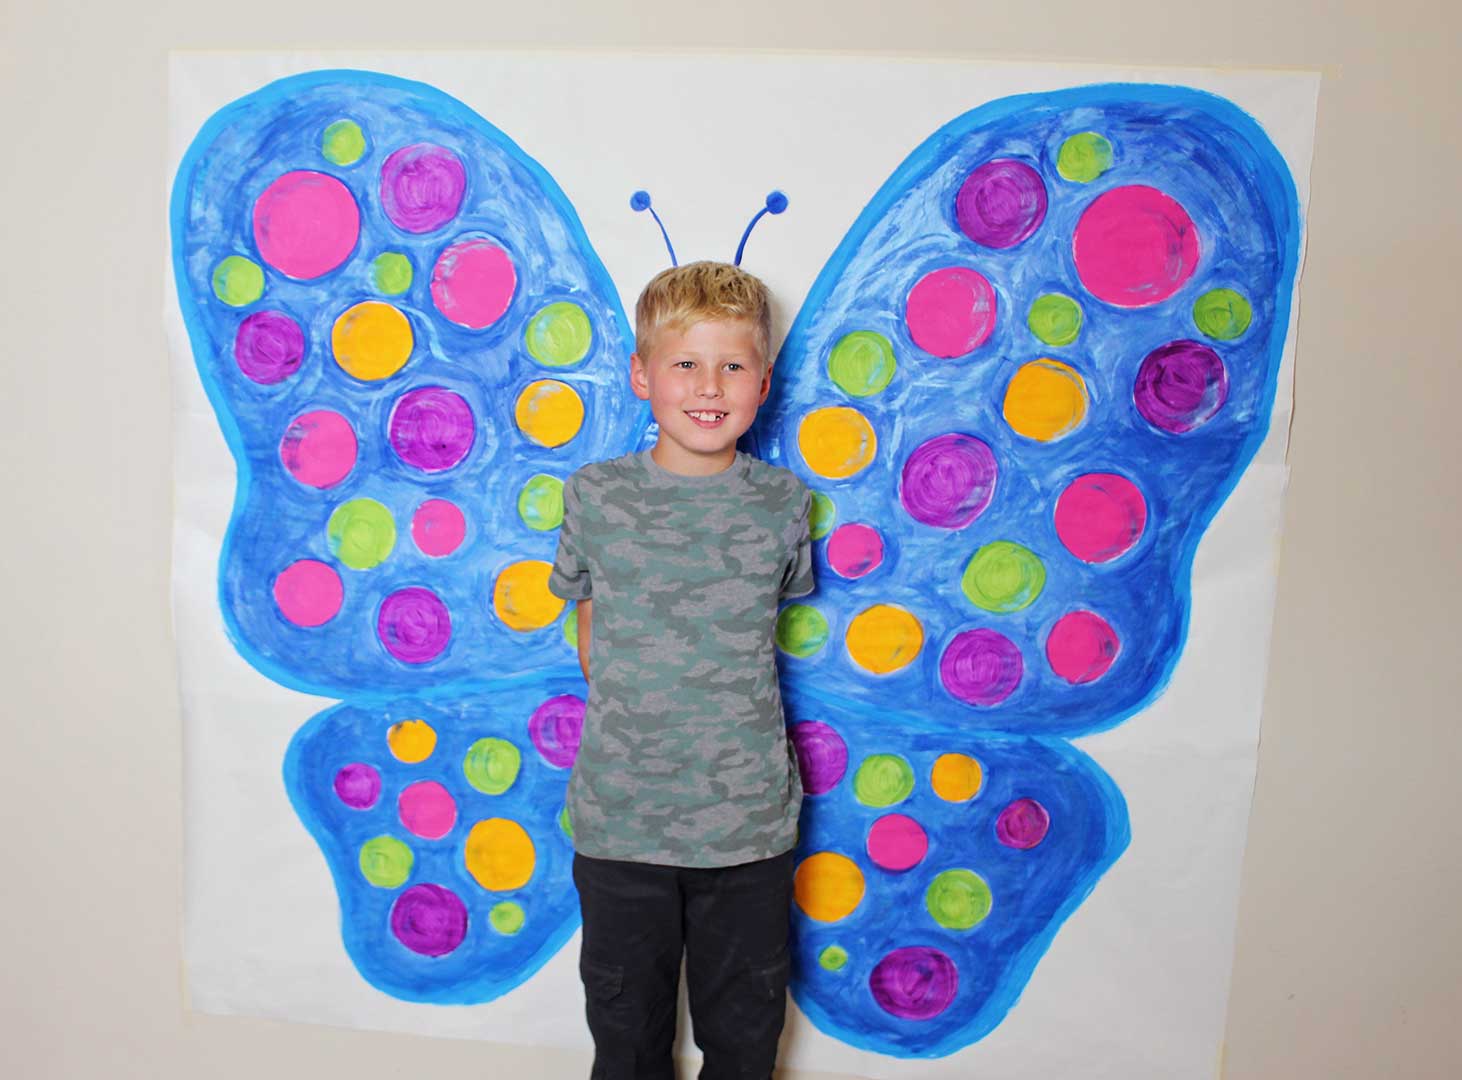 A child standing in front of a painted picture of butterfly wings and antennae.